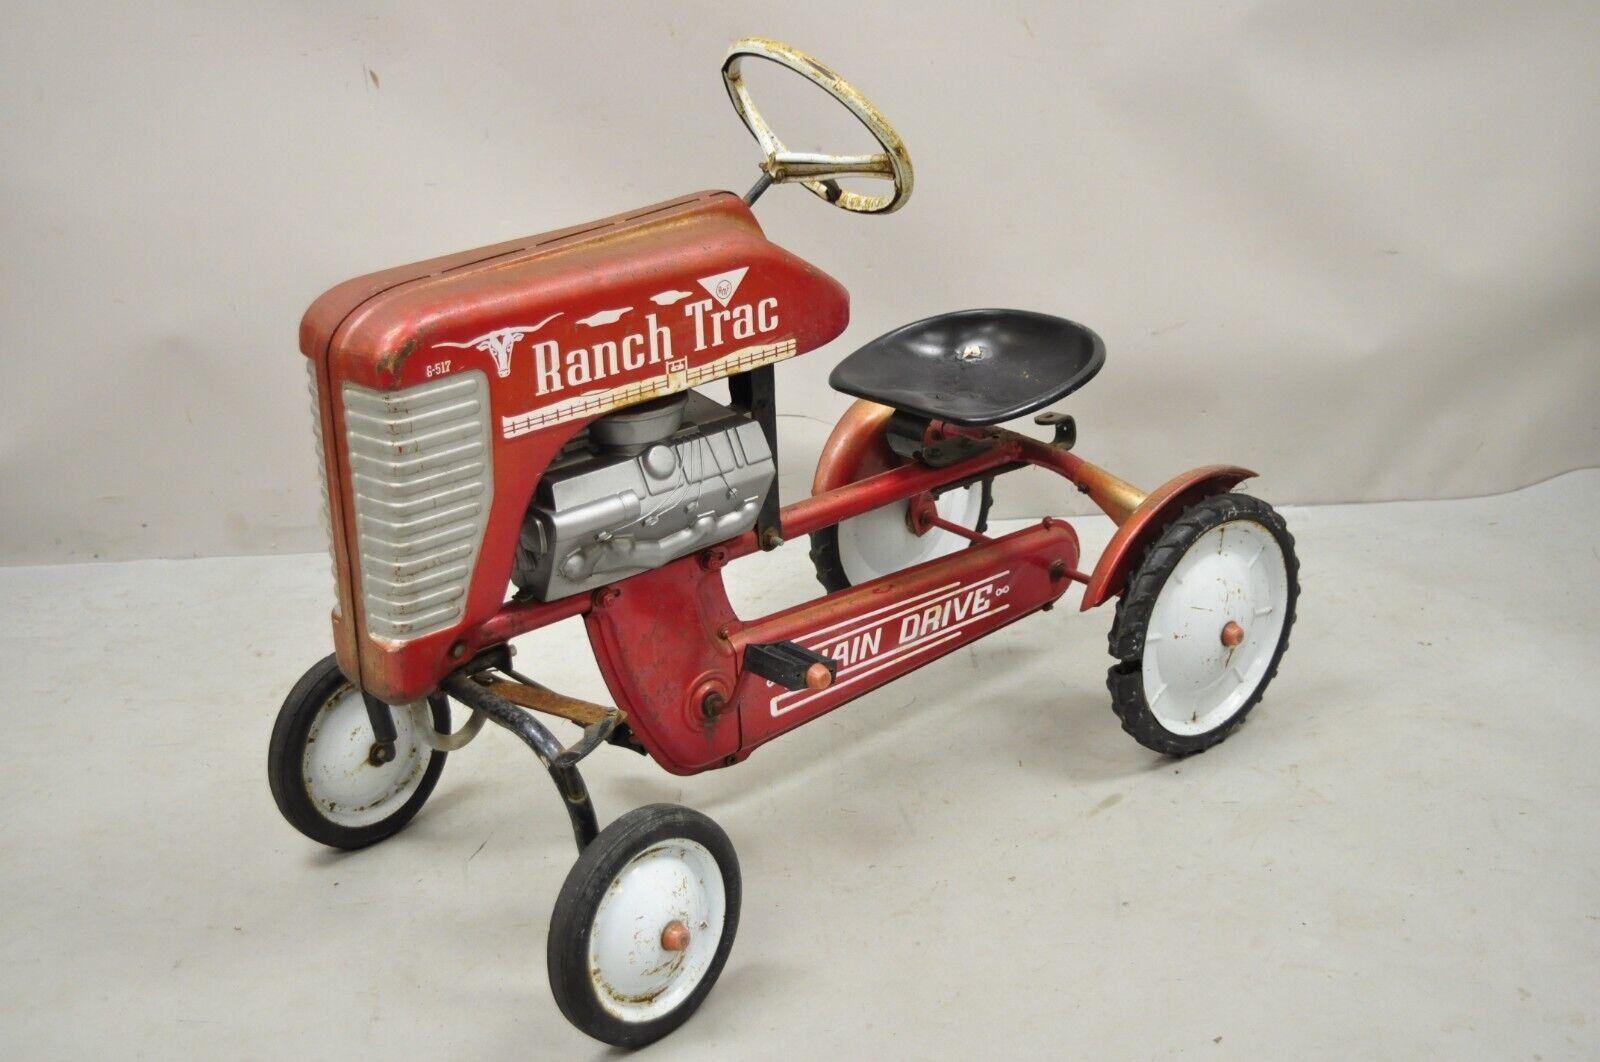 Vintage Red AMF Ranch Trac Chain Drive Pedal toy tractor. Circa Early to Mid 20th Century. Measurements: 26.5